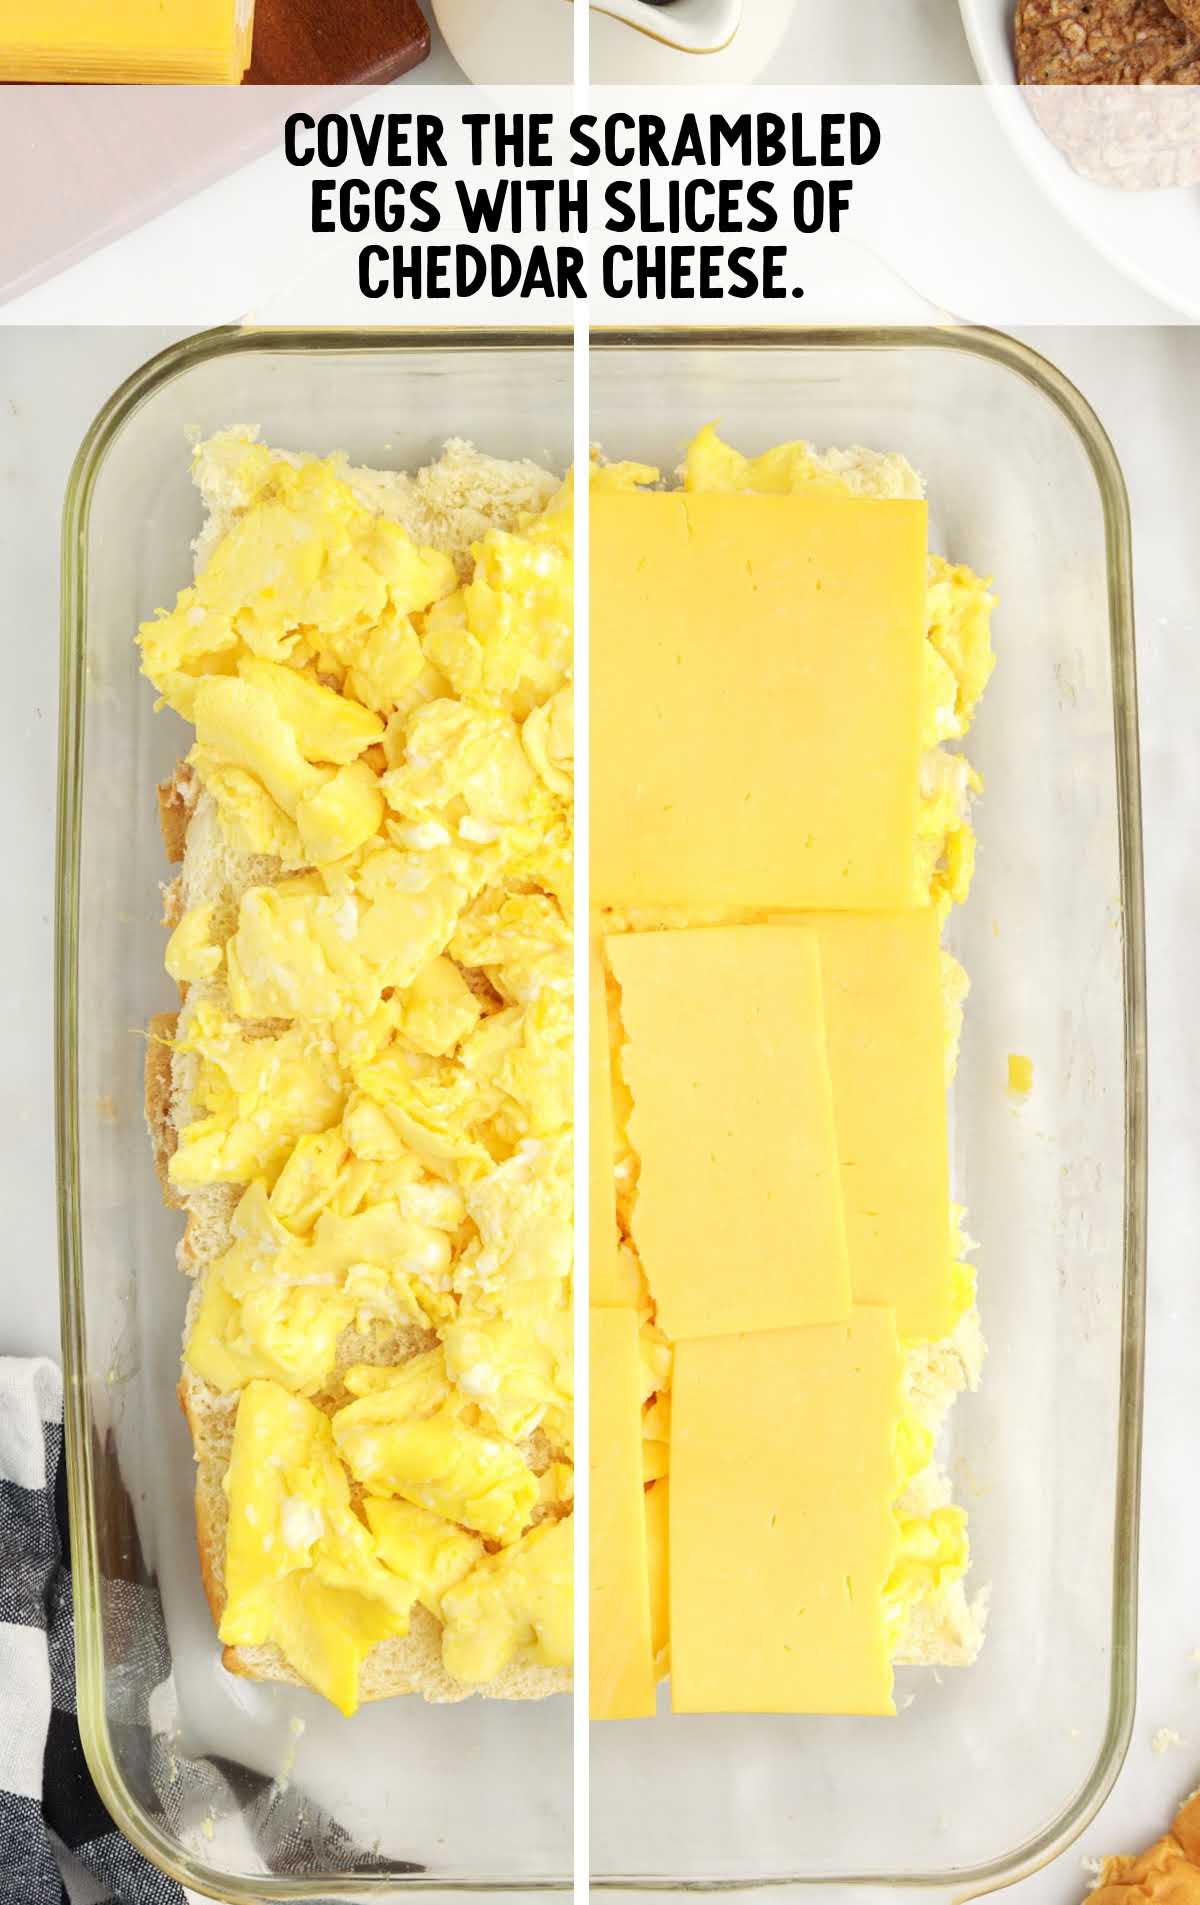 bread covered with scrambled eggs and slices of cheddar cheese